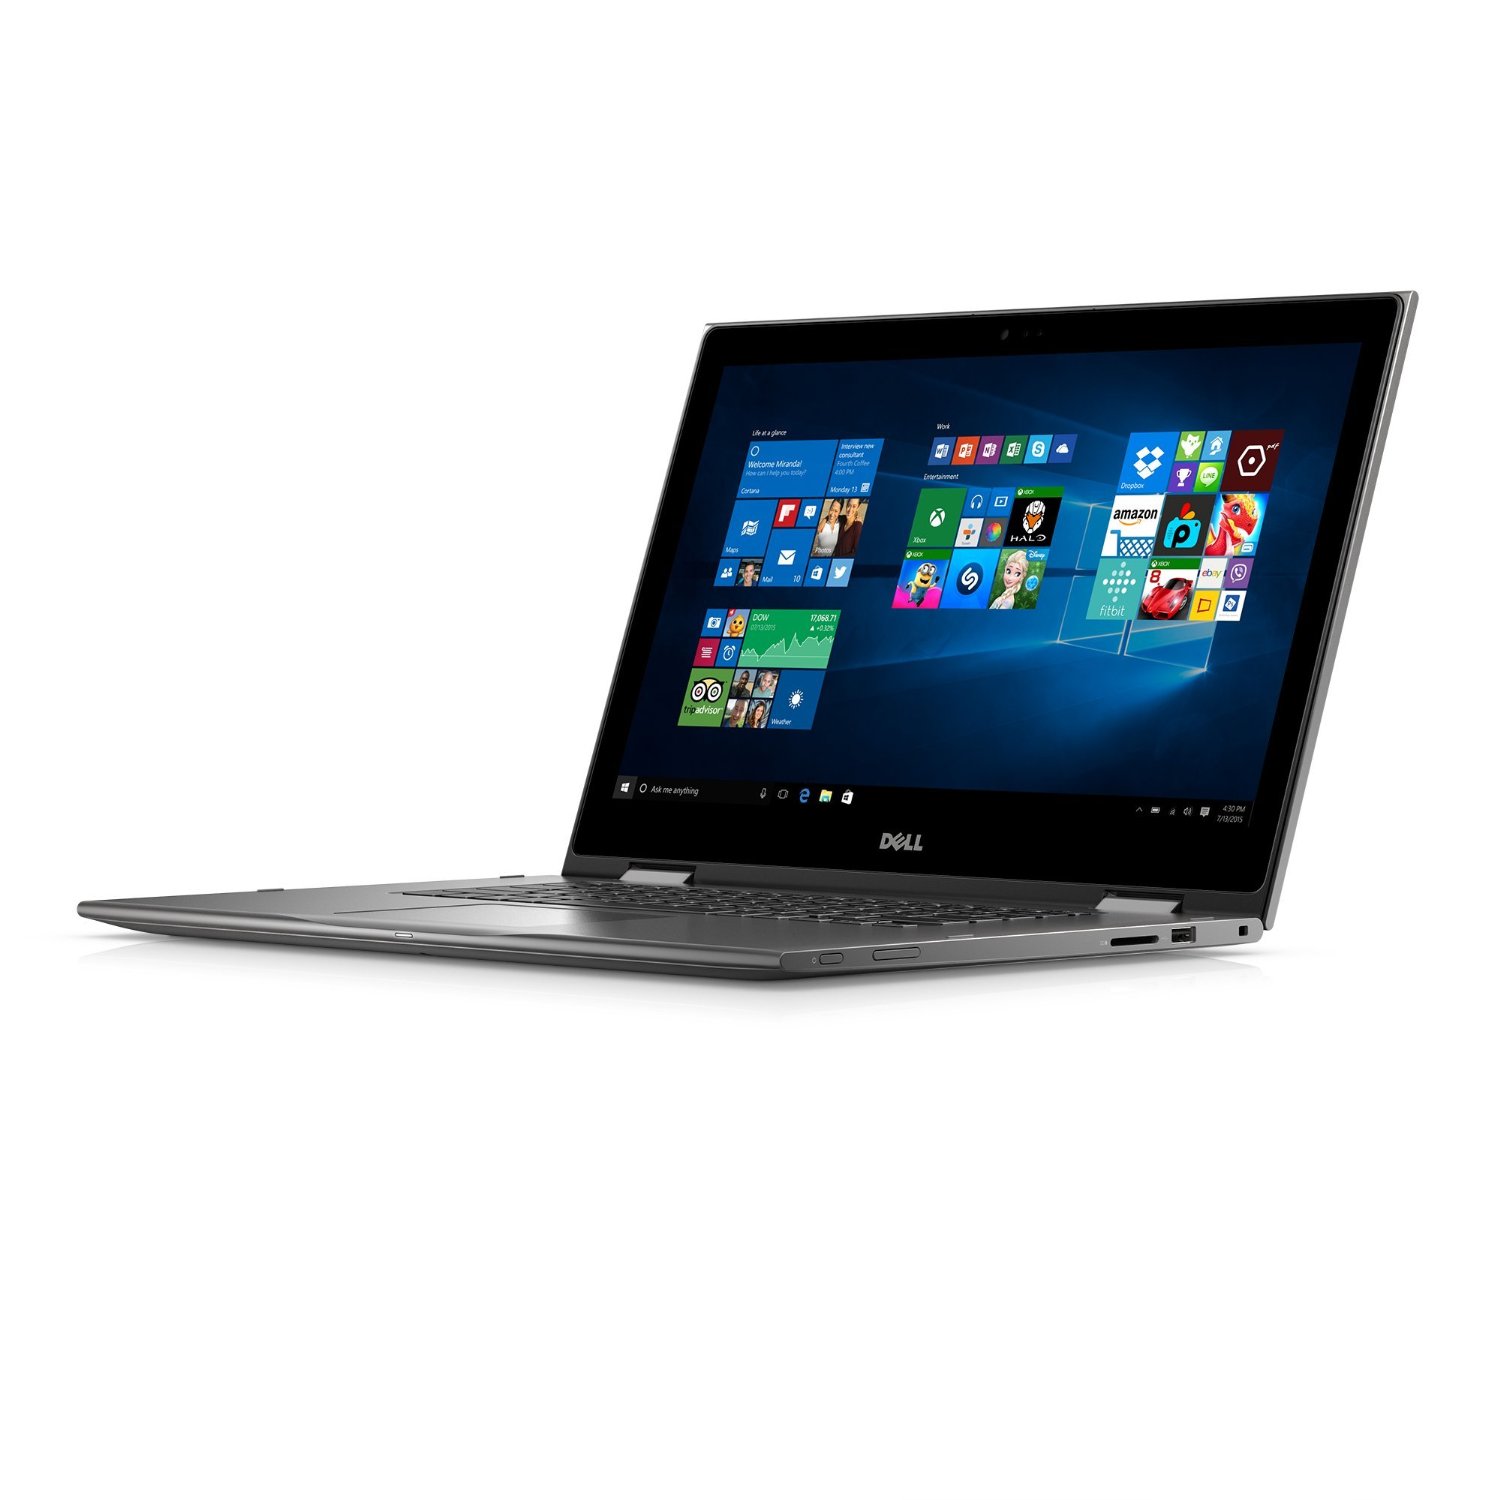 Dell i5568-3746GRY Intel Core i5-6200U 2.3GHz 15.6" 2-in-1 Laptop Computer - image 4 of 11